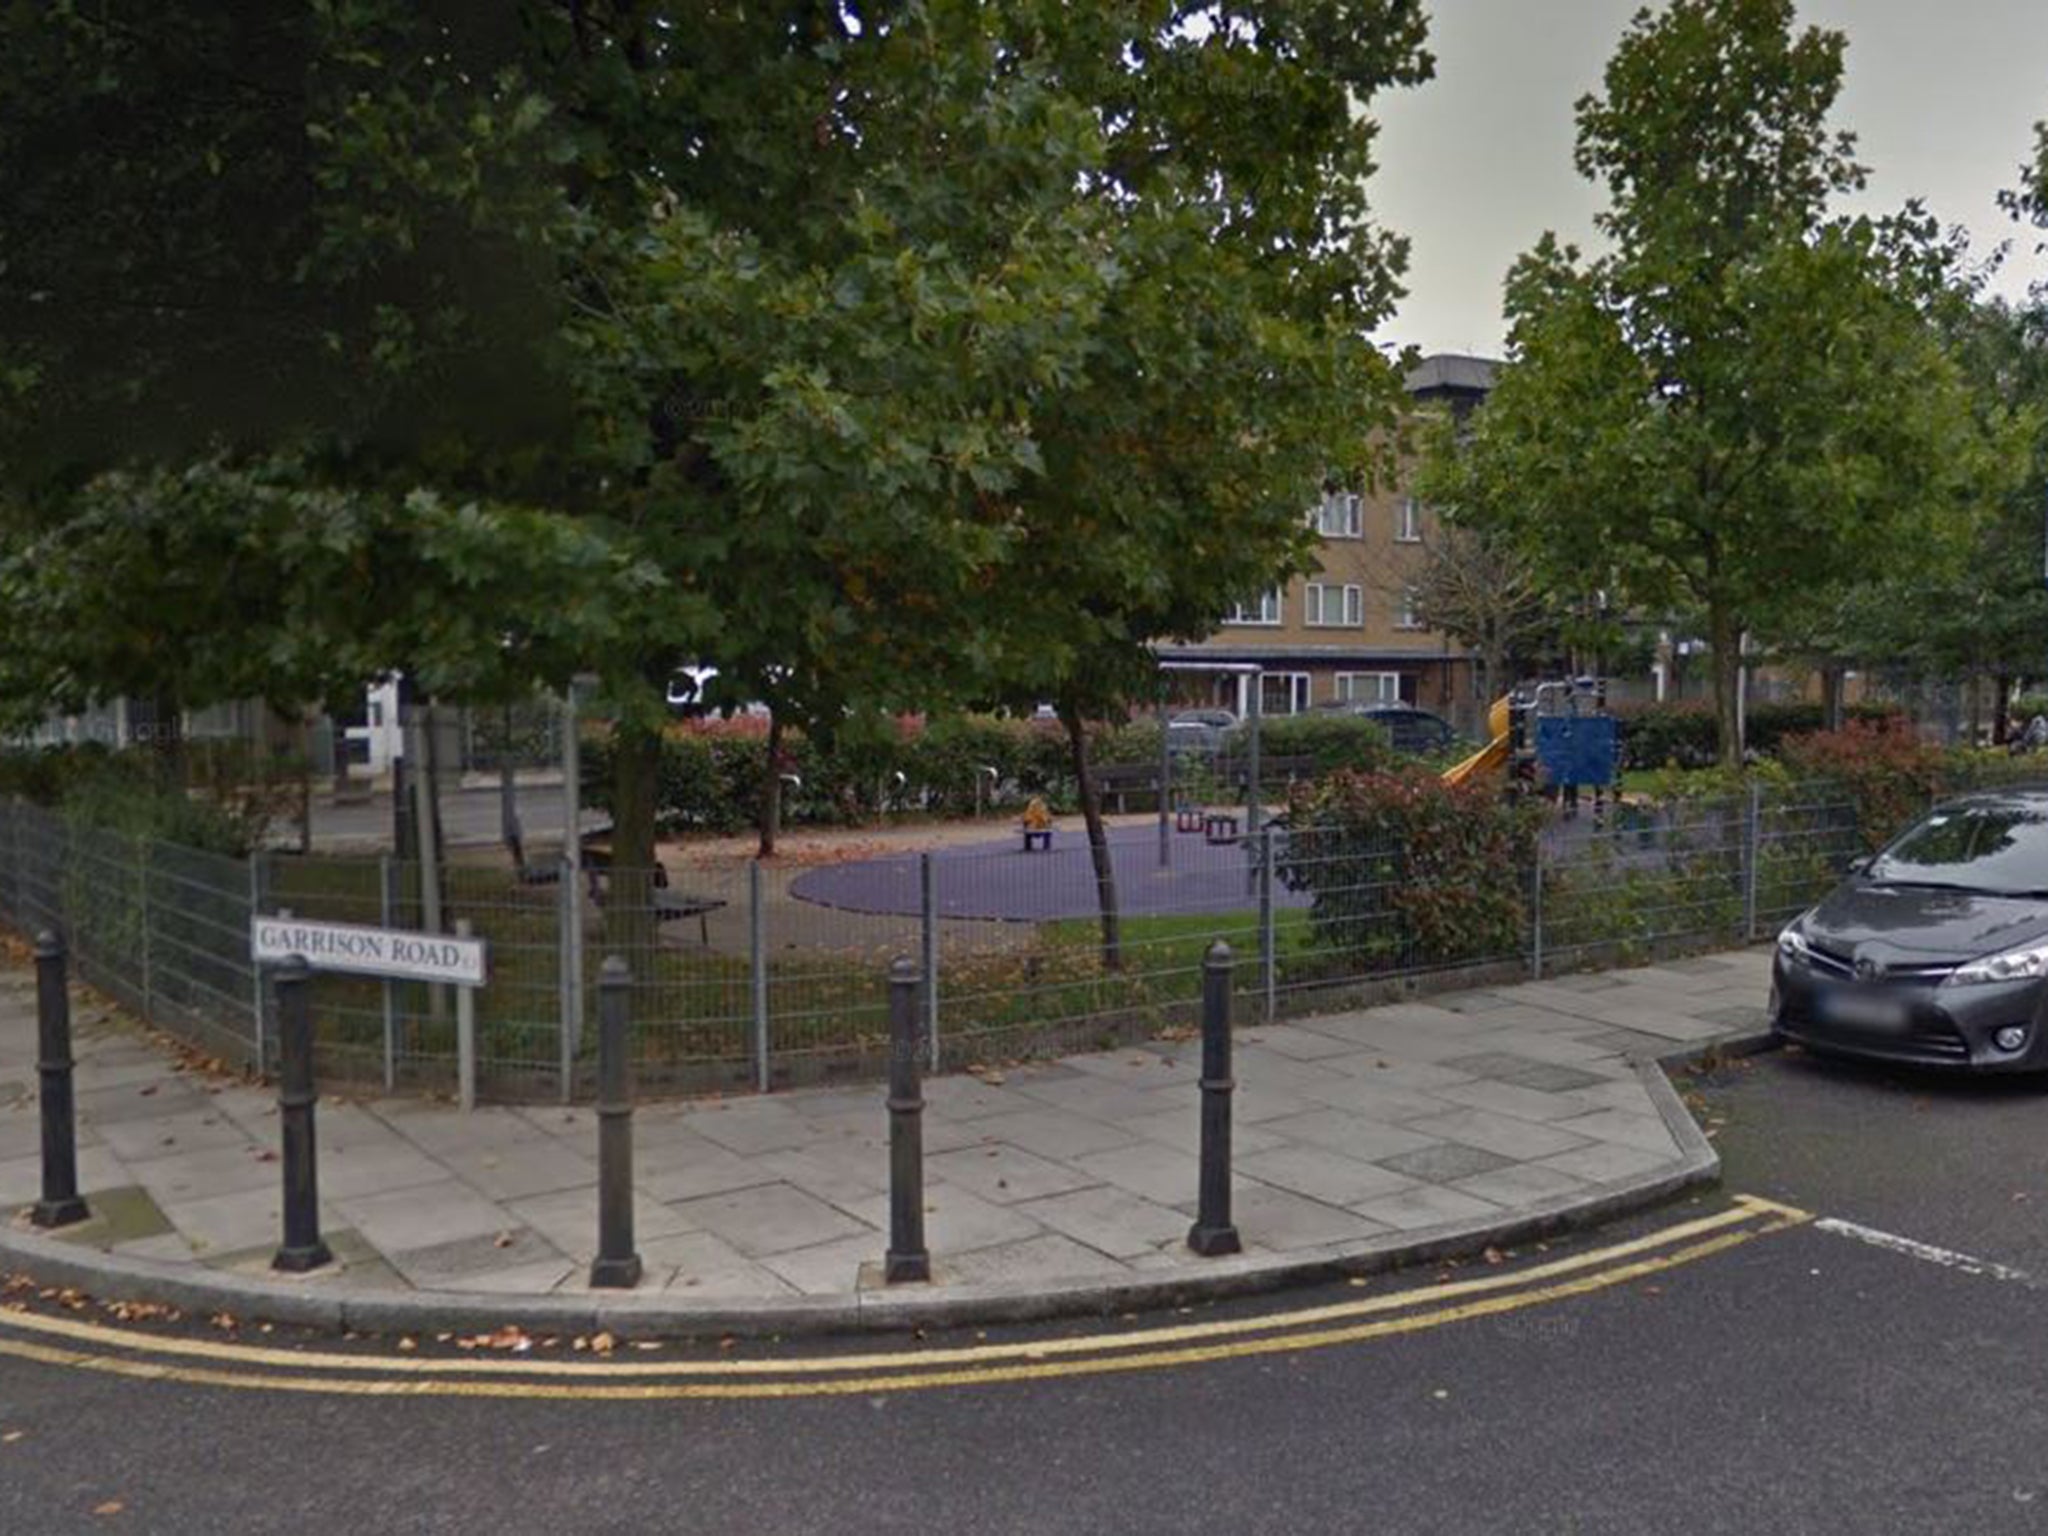 Woman injured during attack on path between Legion Terrace and Garrison Road in Bow